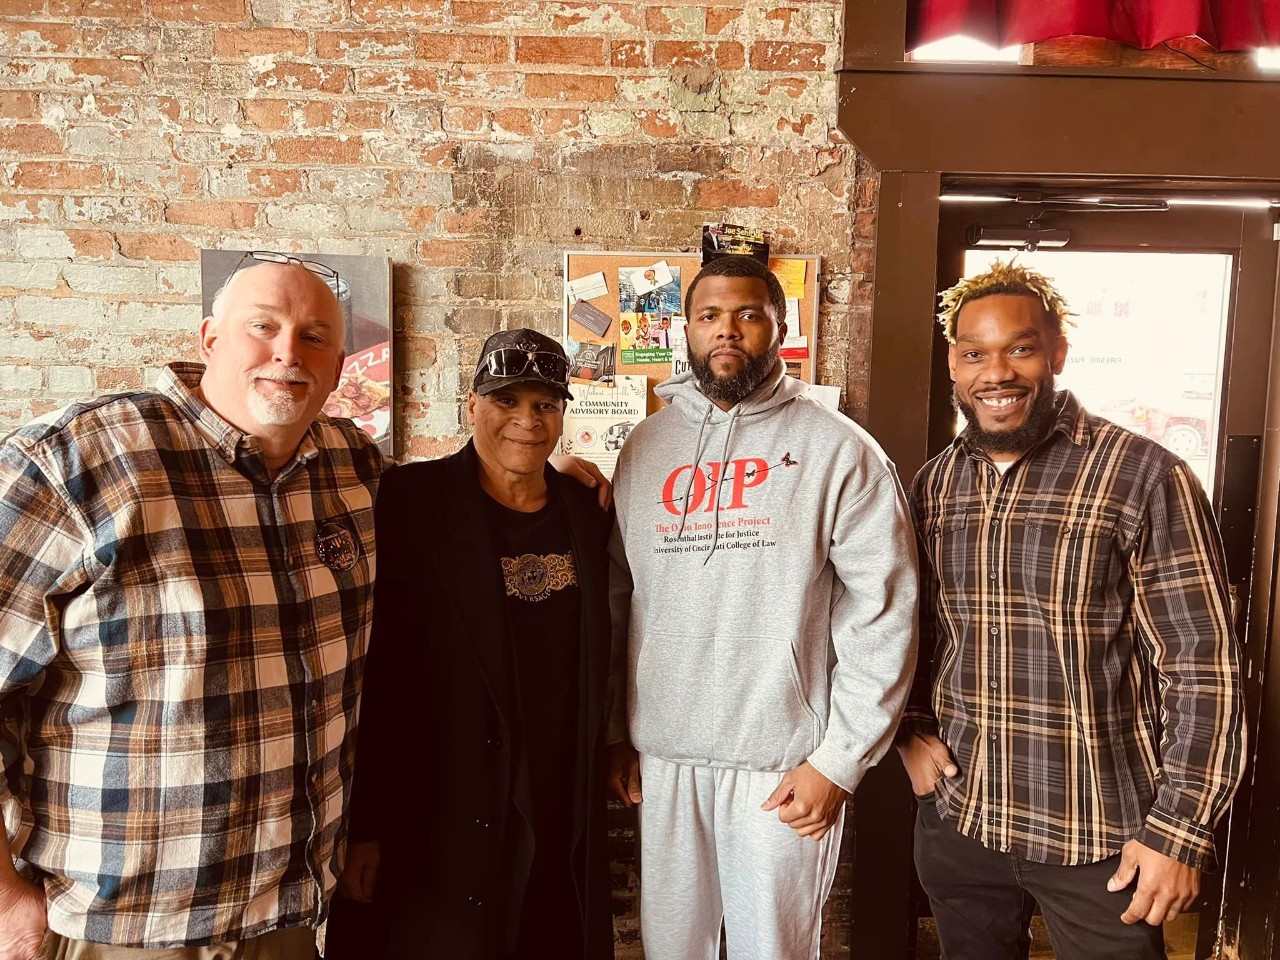 Marcus Sapp in the grey sweatshirt, supported by fellow OIP clients, from left, Dean Gillispie, Robert McClendon and Christopher Smith.